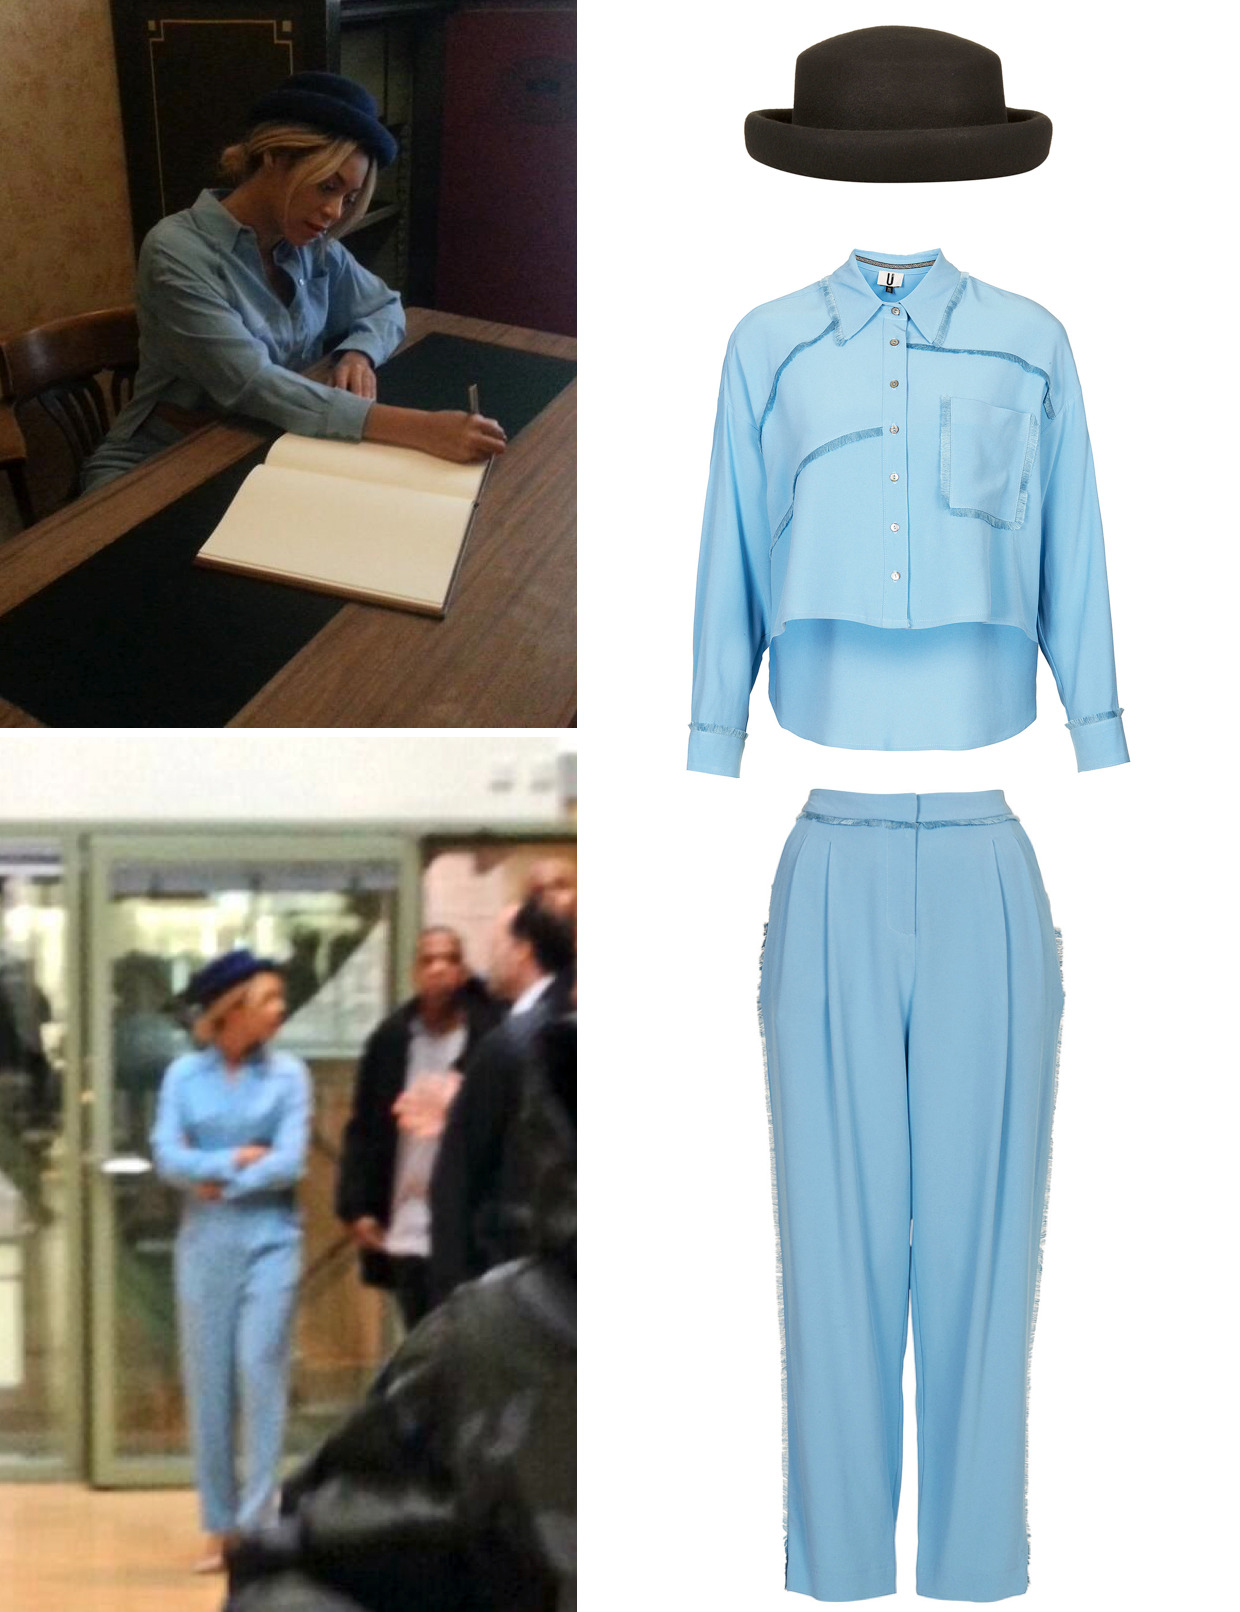 beyonceinfo:
“ Beyoncé was wearing Unique by TOPSHOP pale blue fray shirt ($240), matching fringe trousers ($300) and pork pie hat ($50)
”